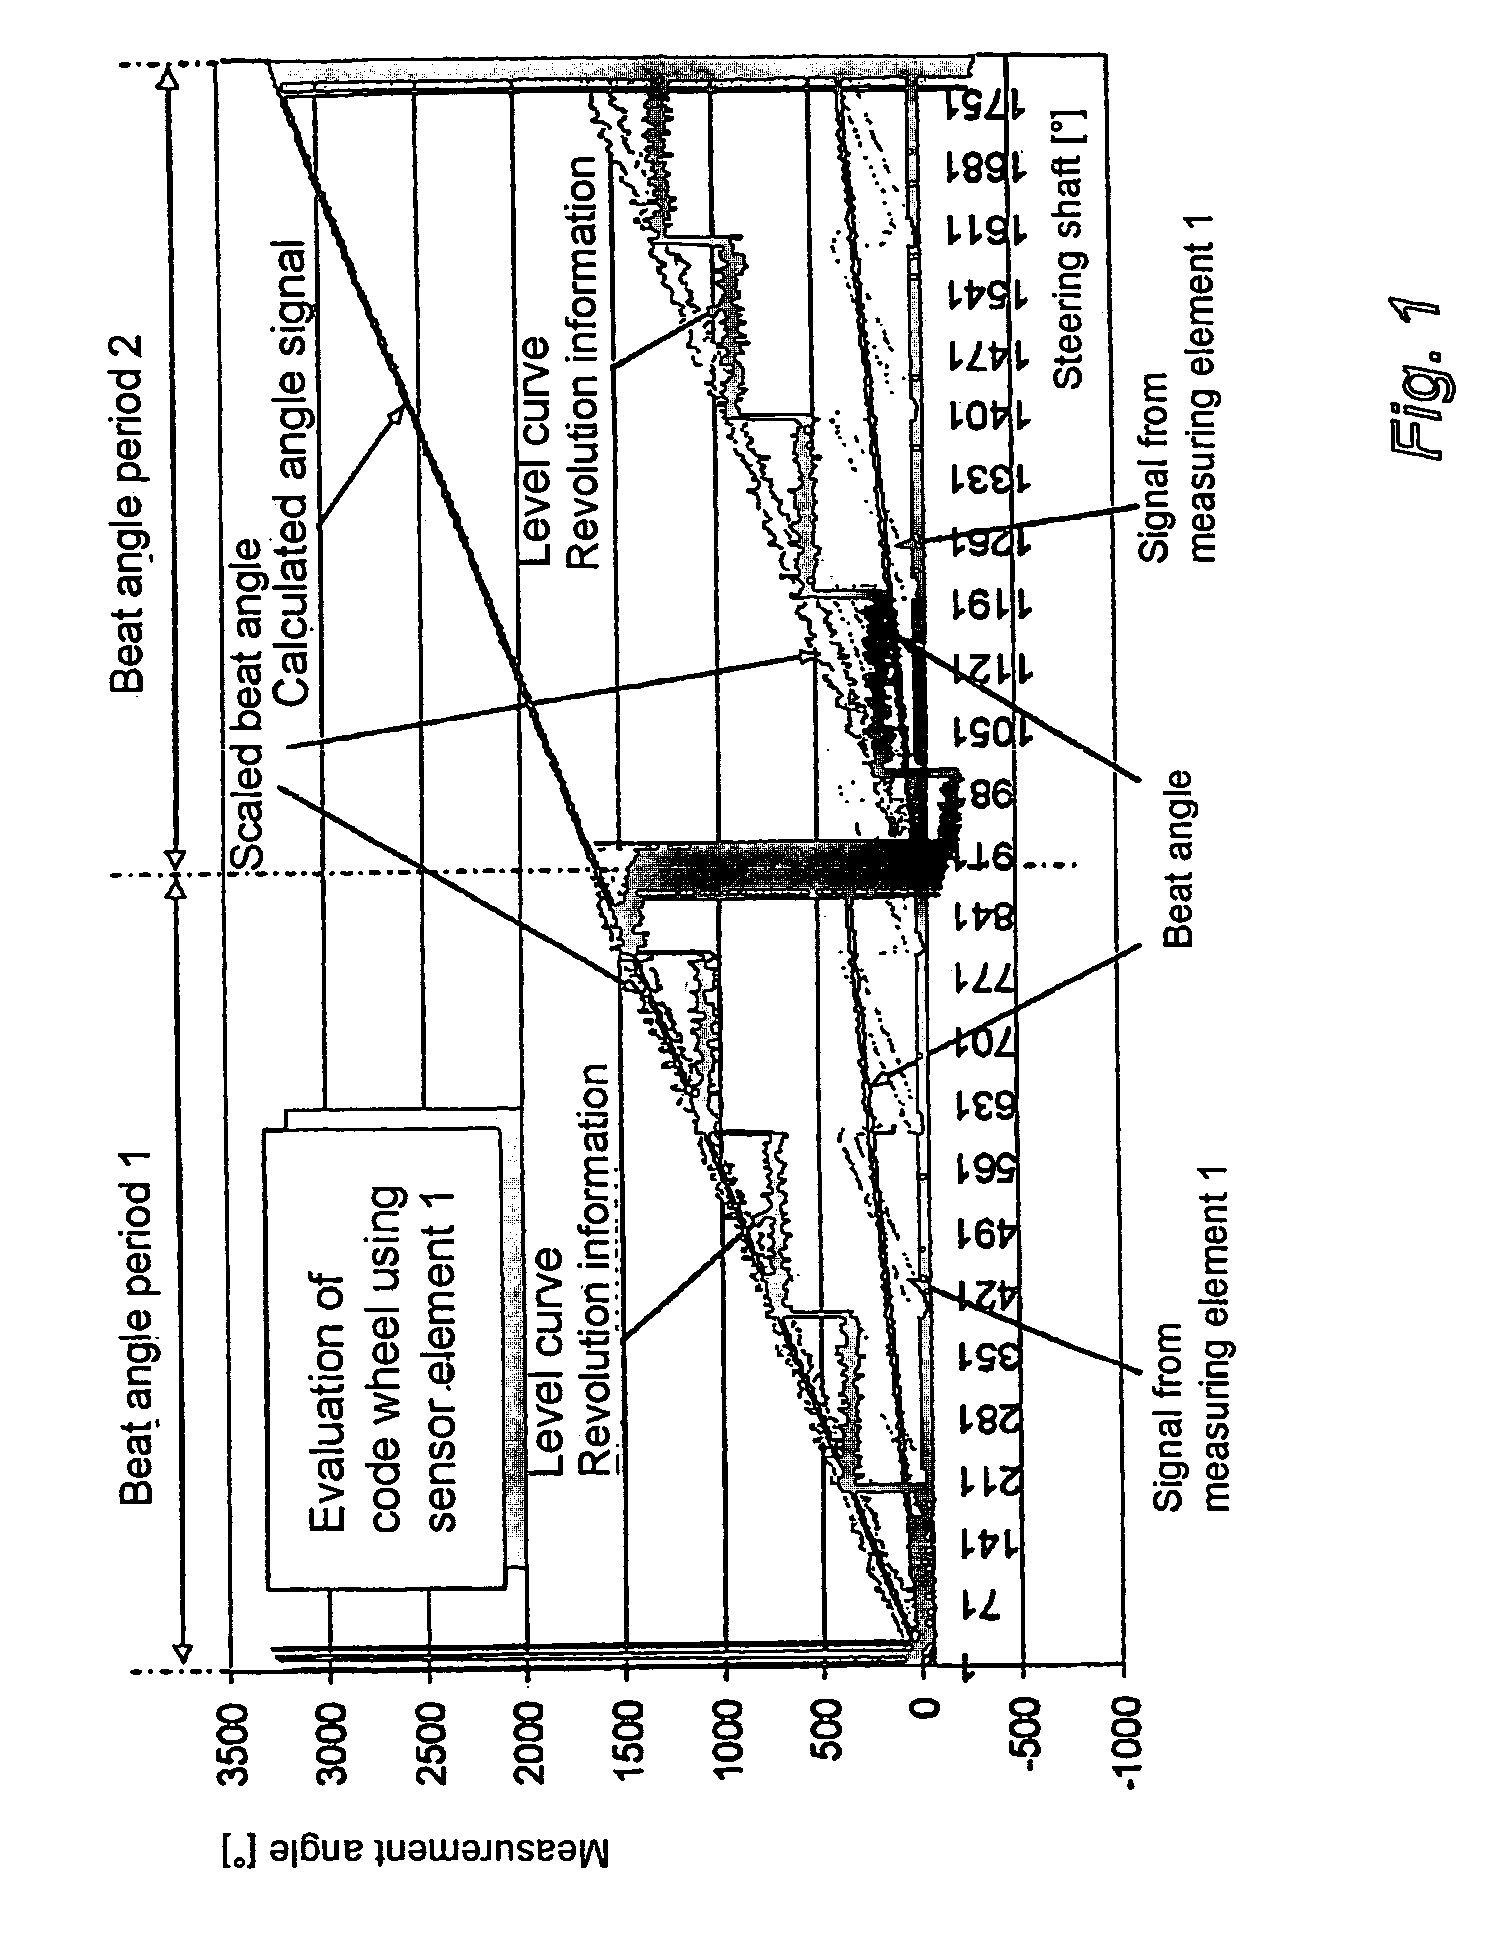 Rotation angle sensor and method for determining the absolute angular position of a body undergoes several rotations